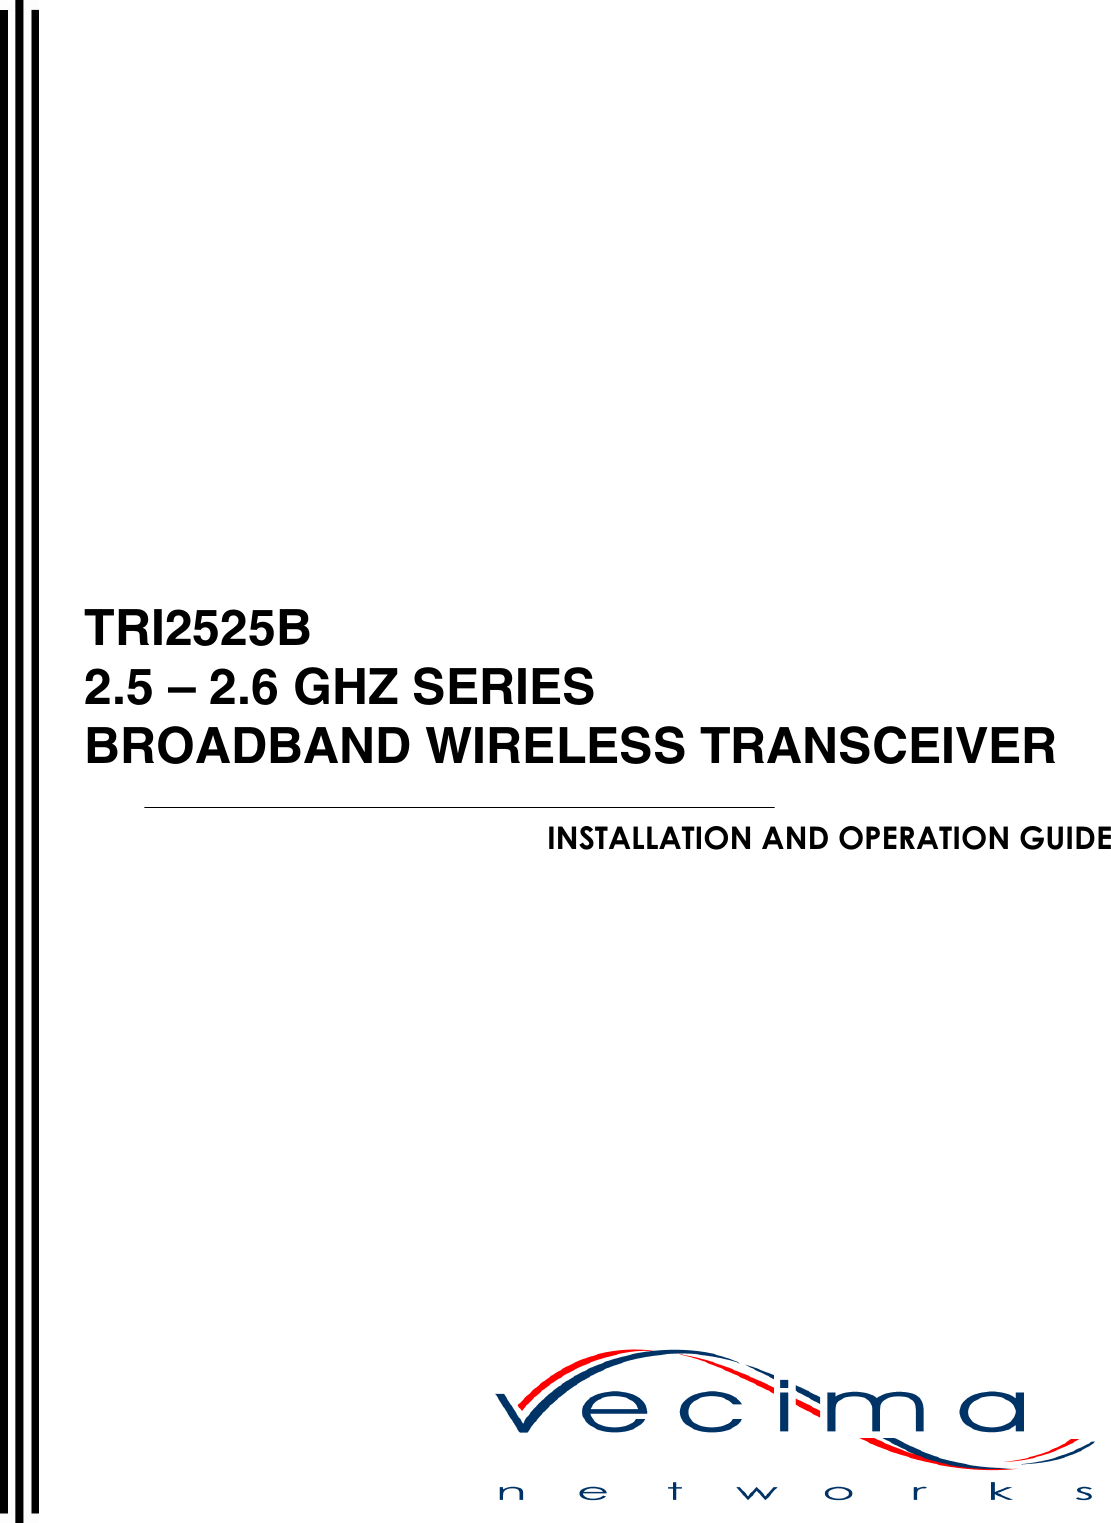      TRI2525B 2.5 – 2.6 GHZ SERIES BROADBAND WIRELESS TRANSCEIVER  INSTALLATION AND OPERATION GUIDE   